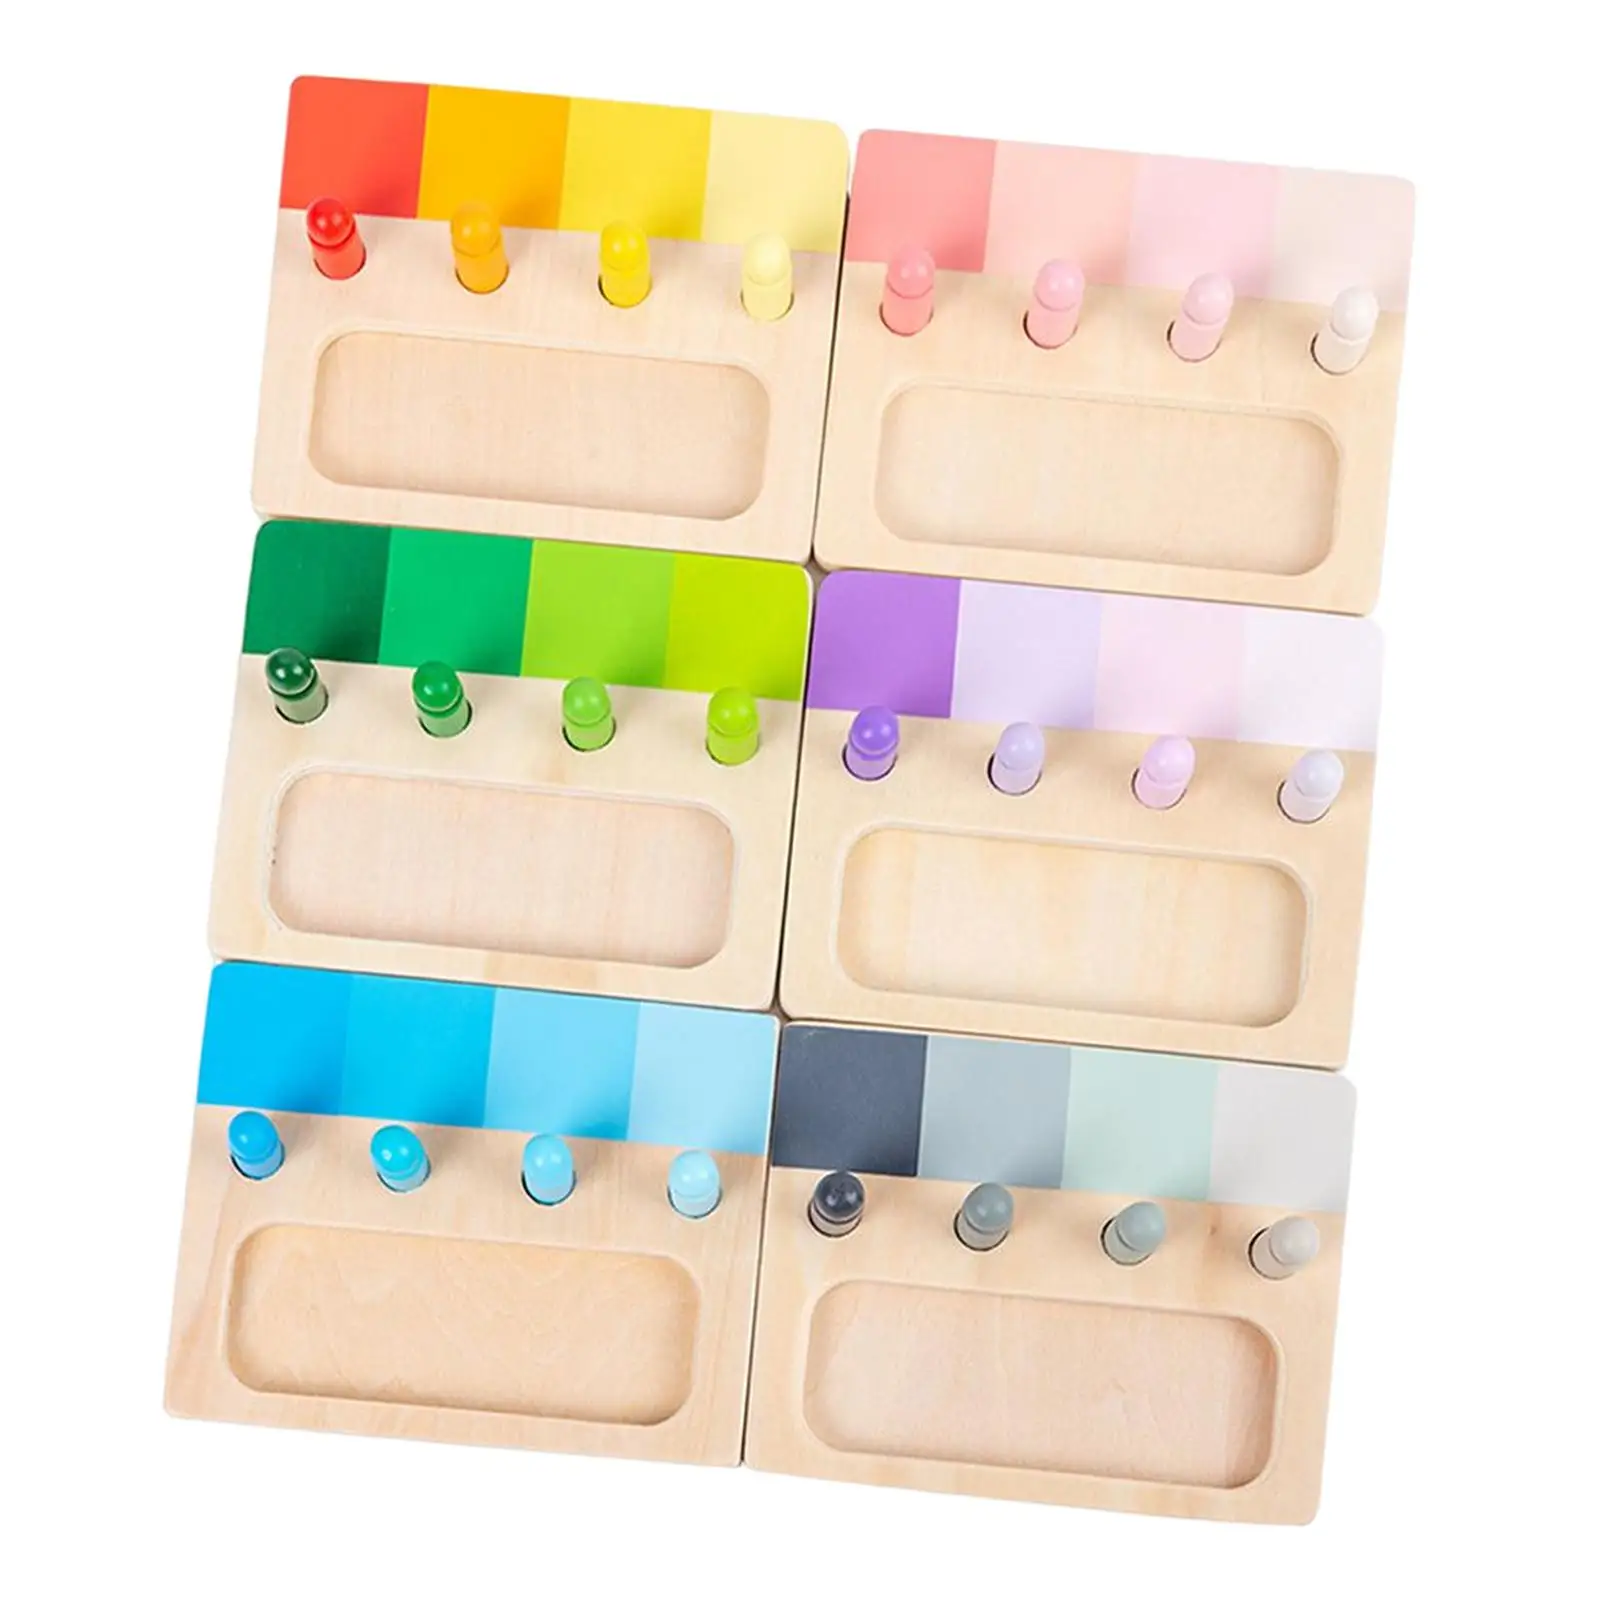 6Pcs Color Matching Toy Montessori Sensorial Educational Tools for Learning